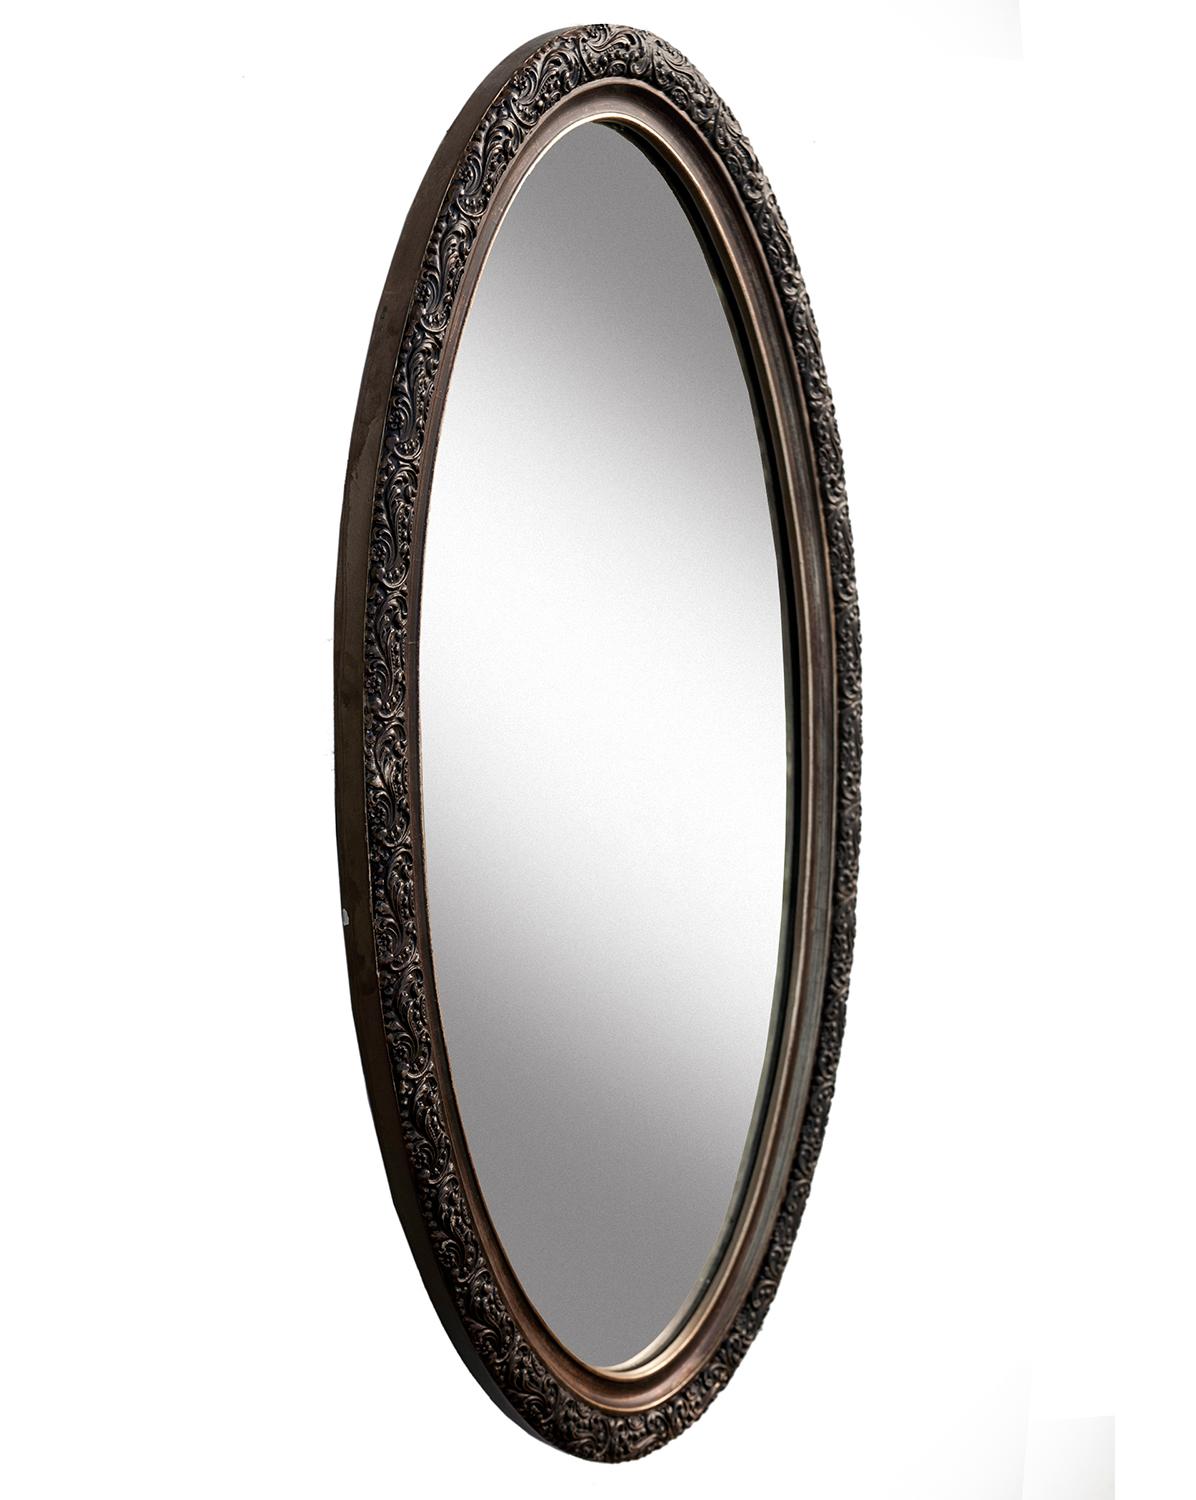 Dark Gold & Brown Vintage Oval Mirror  In Good Condition For Sale In Malibu, CA